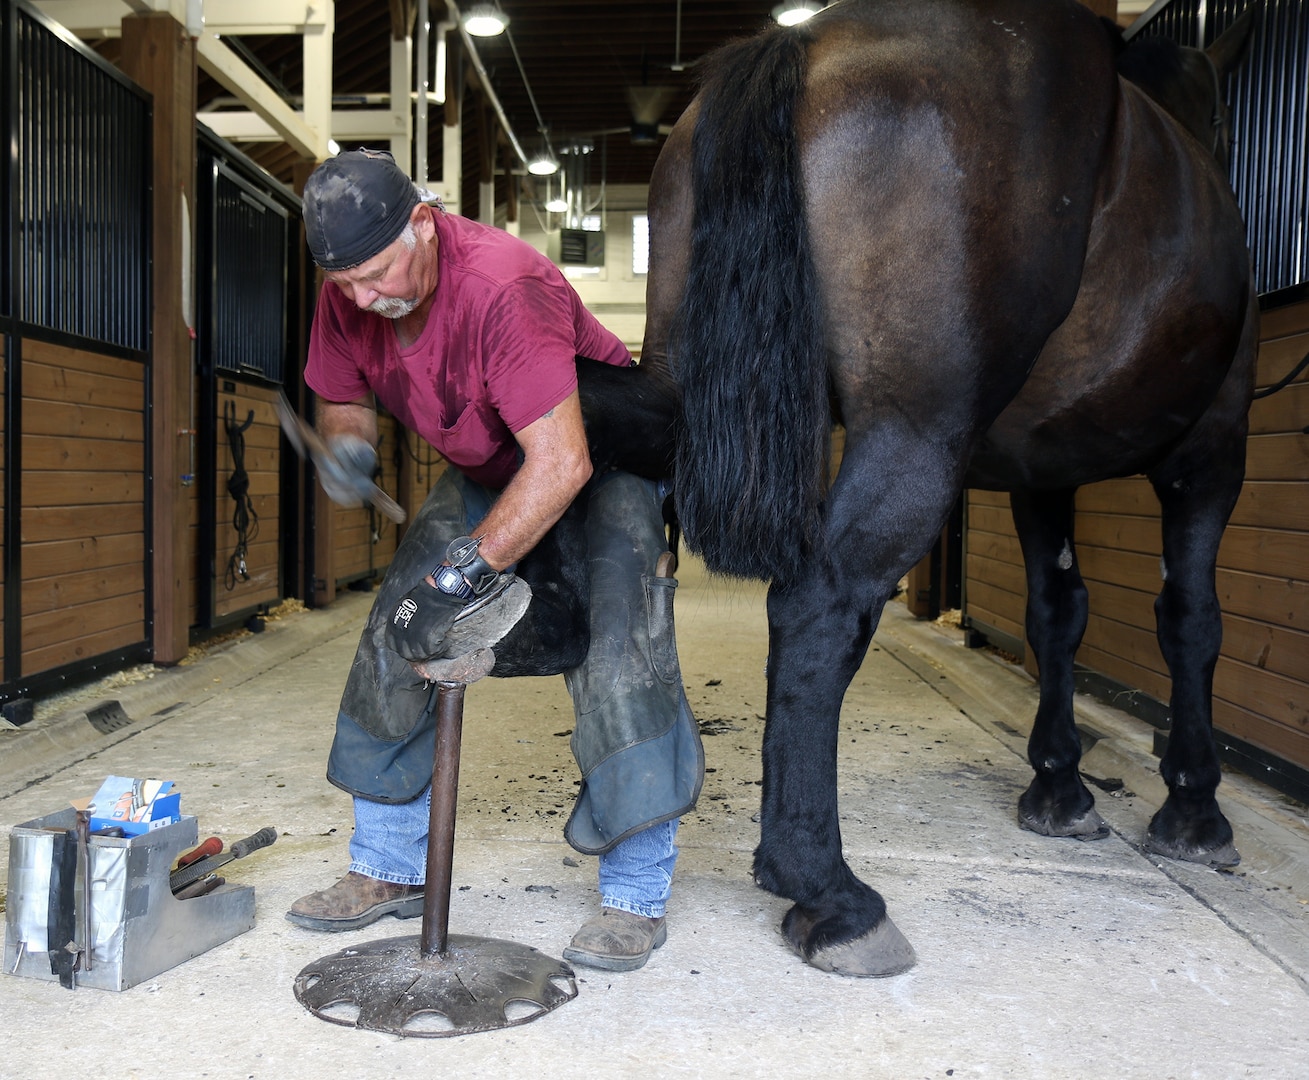 Rodney "Skip" Burgess, a farrier, resets the shoe of U.S. Army North Caisson horse Munemori at the Fort Sam Houston Caisson stable at Joint Base San Antonio-Fort Sam Houston Sept. 21.